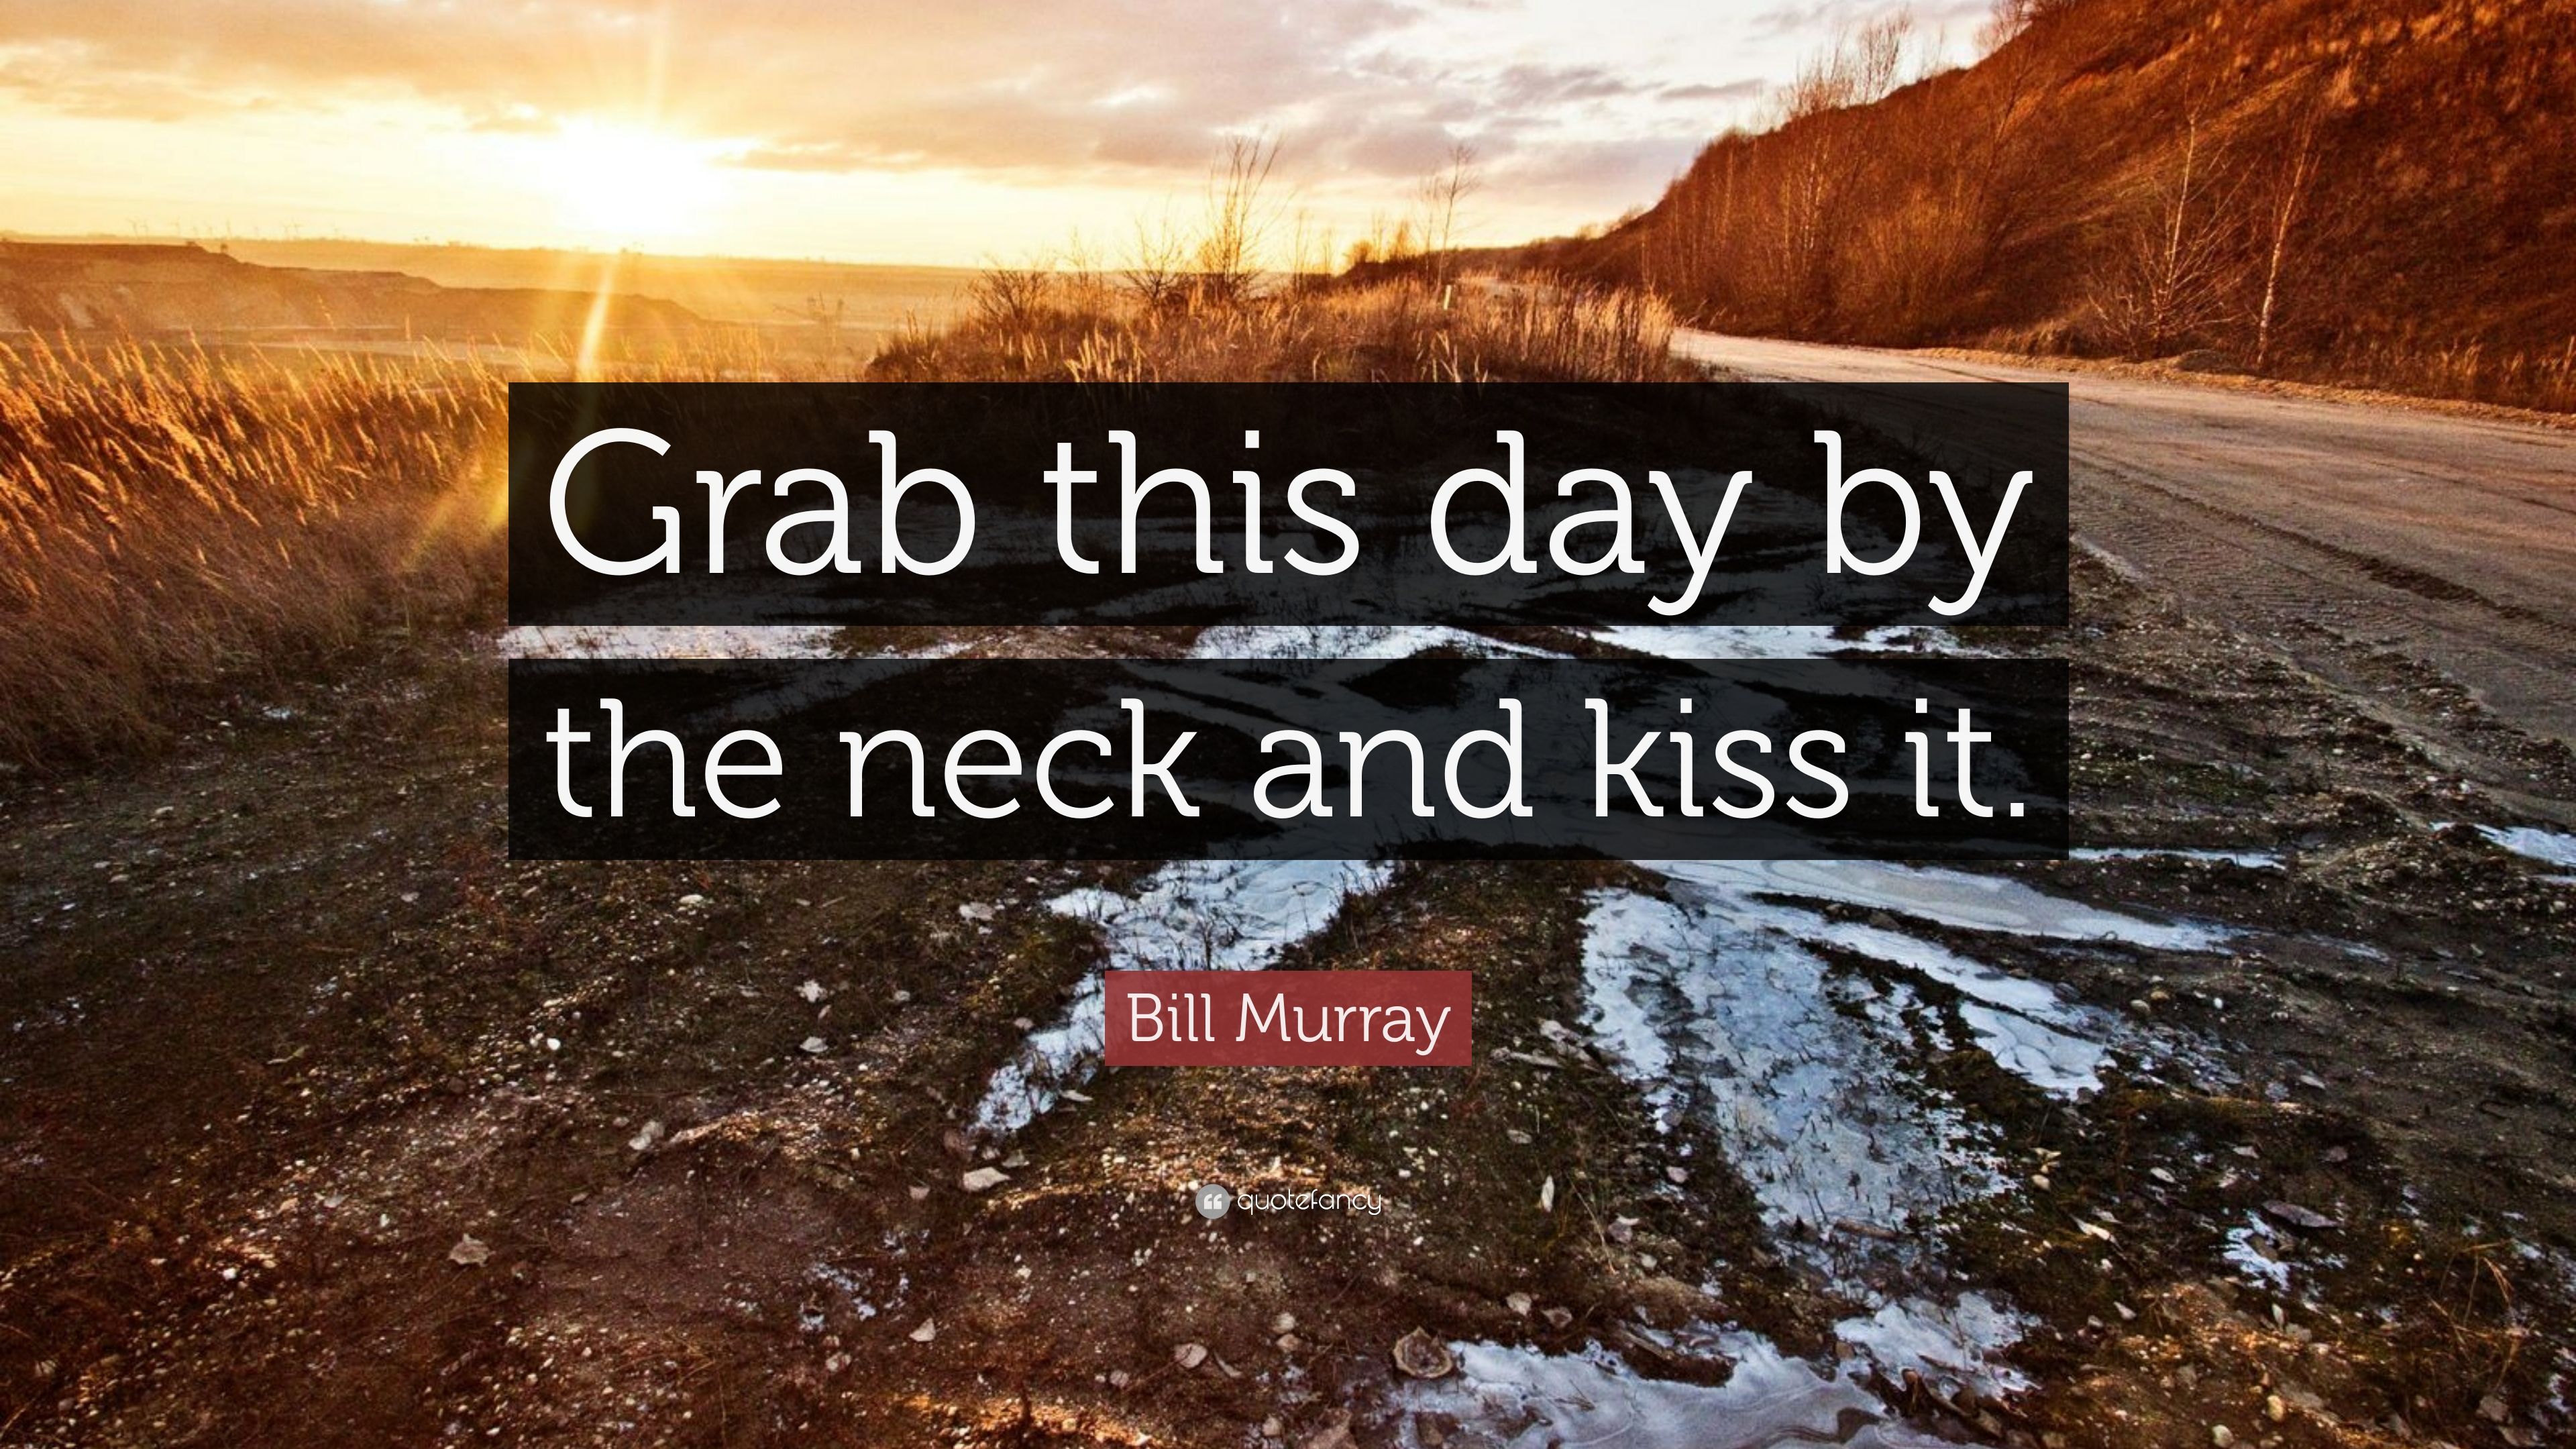 Bill Murray Quote: “Grab this day by the neck and kiss it.” 7